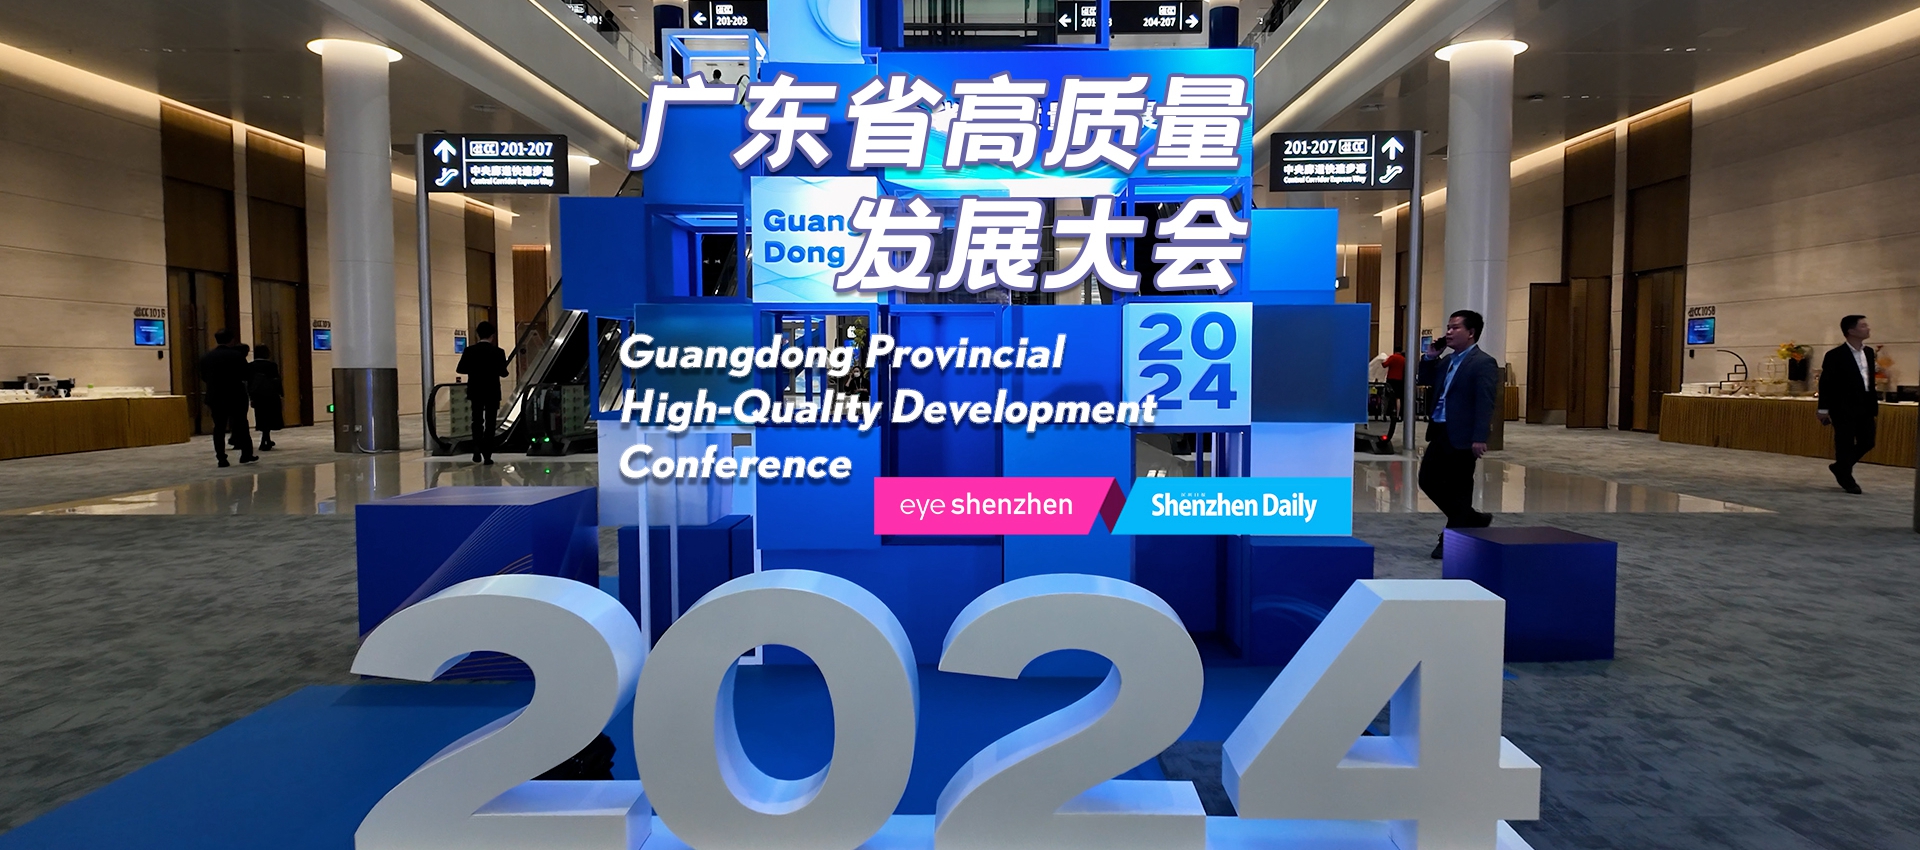 Guangdong holds high-quality development conference in SZ